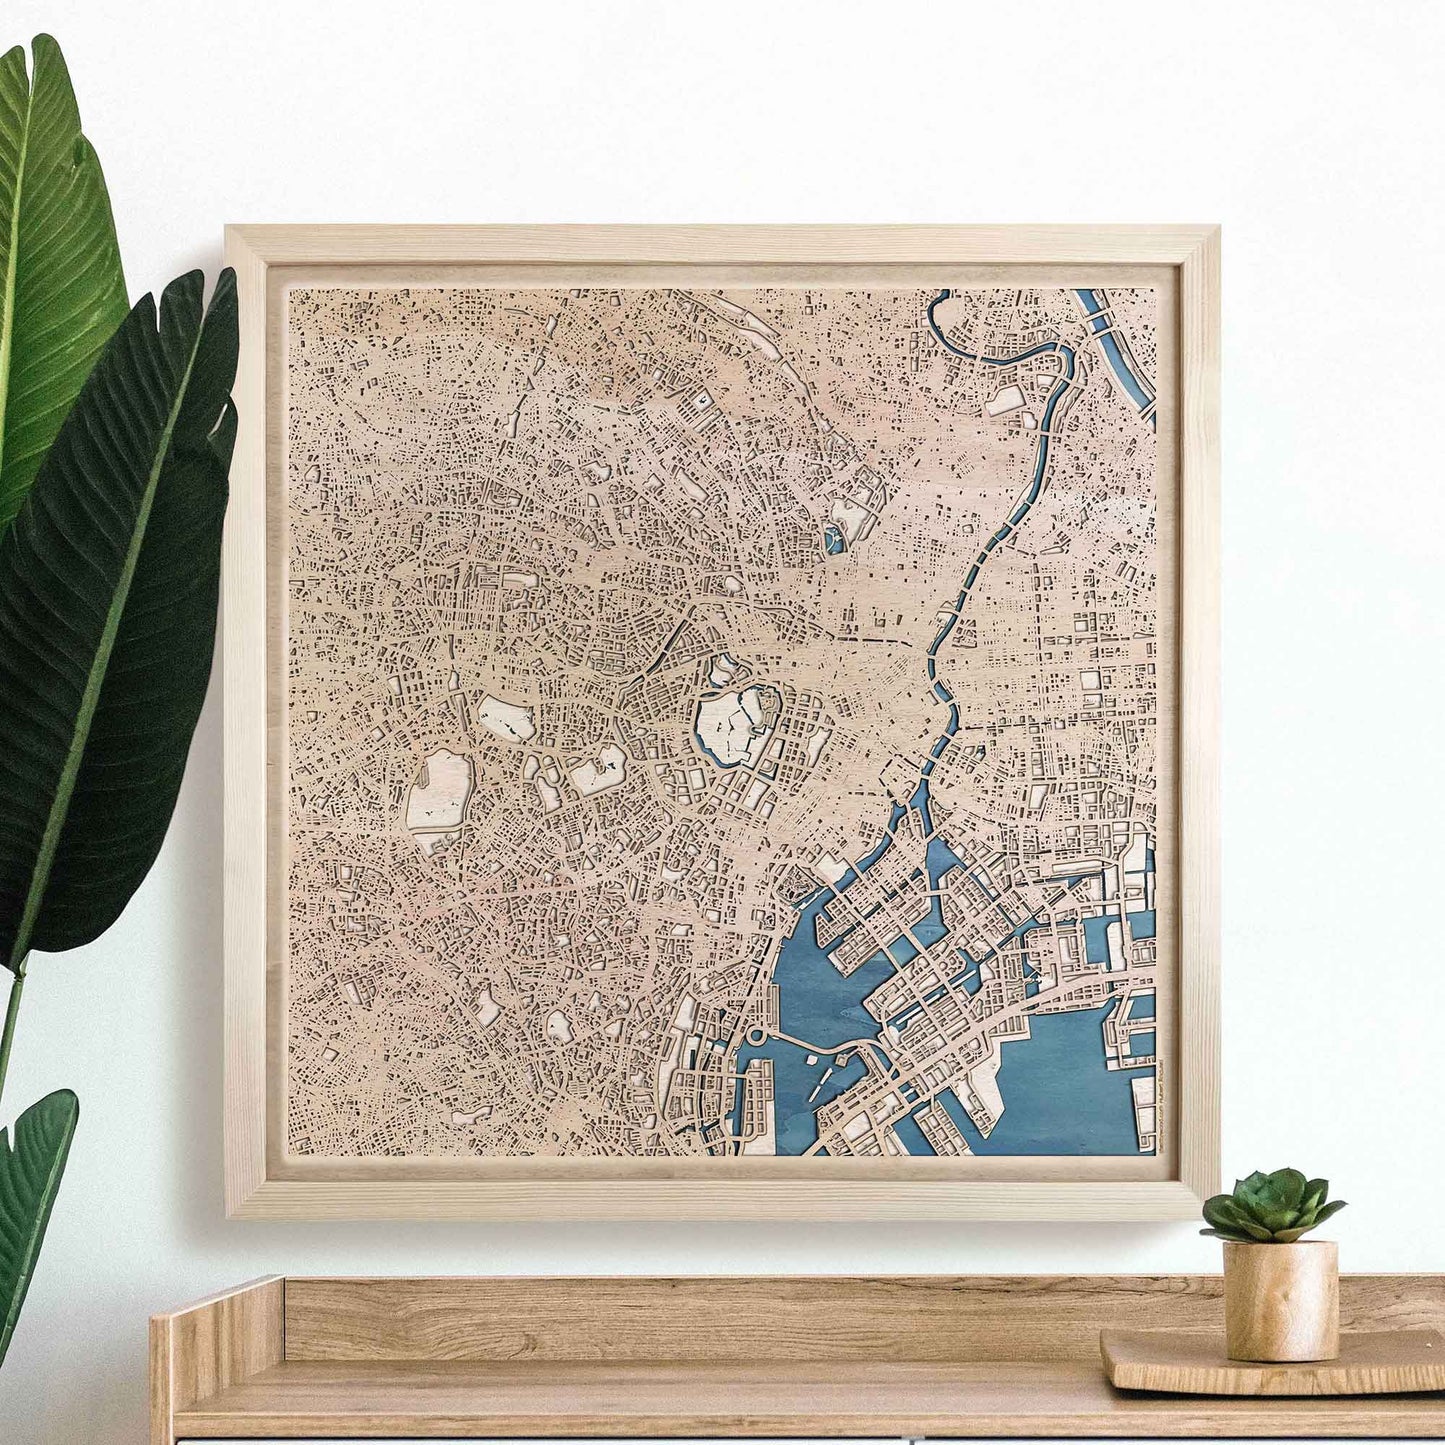 Tokyo Wooden Map by CityWood - Custom Wood Map Art - Unique Laser Cut Engraved - Anniversary Gift